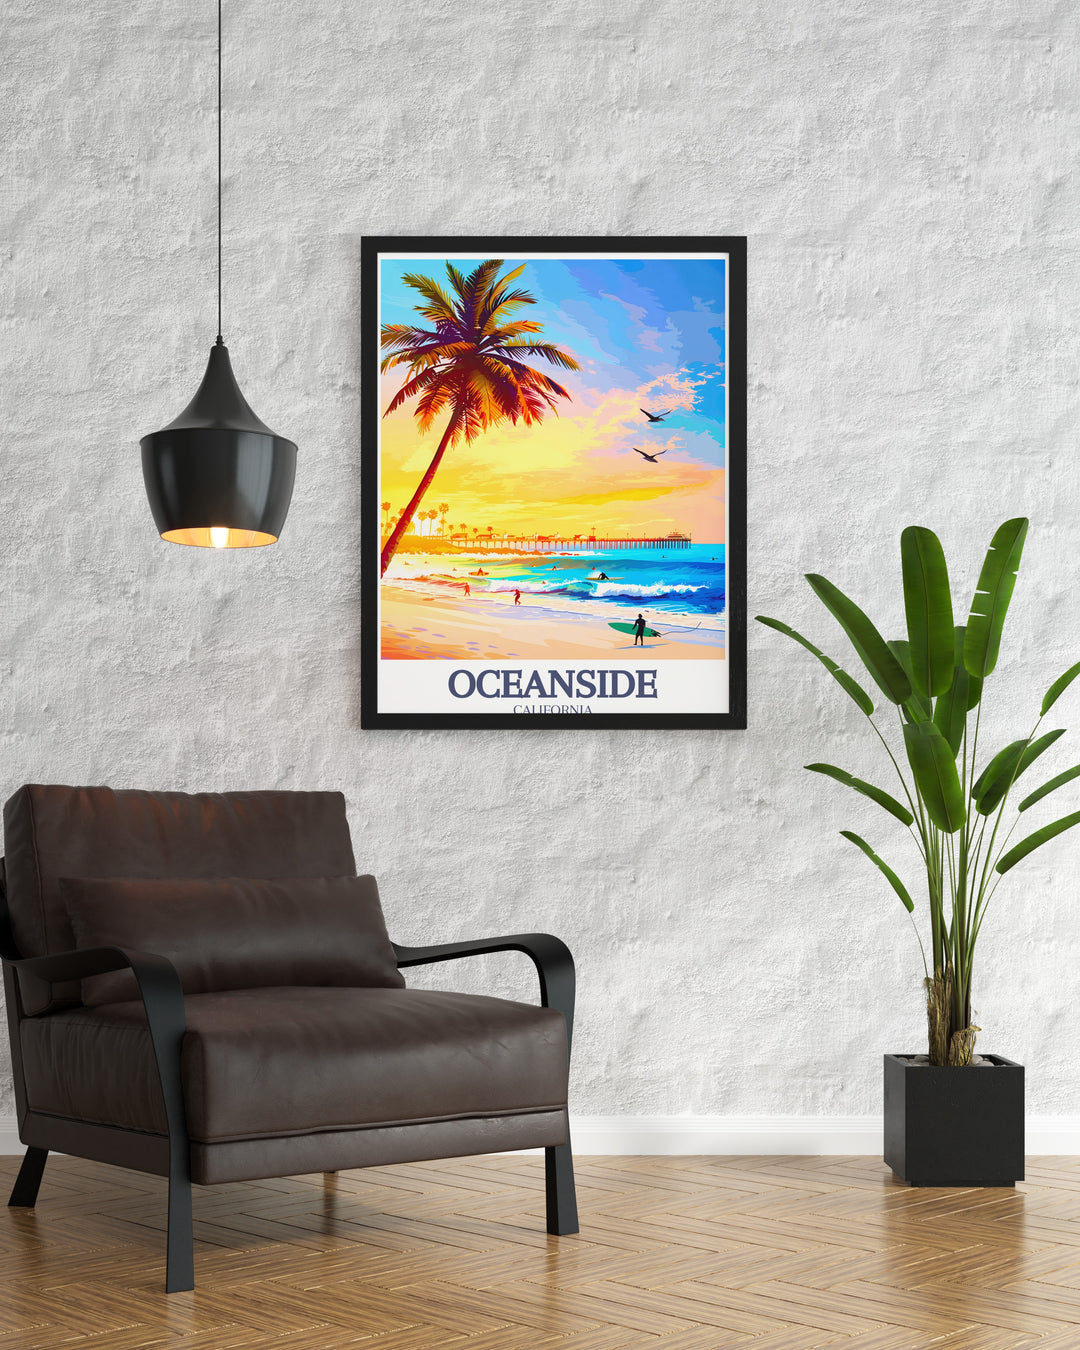 Beautiful illustration of Oceanside Beach and Oceanside Pier bringing the tranquility of the California coast to your home a perfect addition to any art collection or as a thoughtful gift